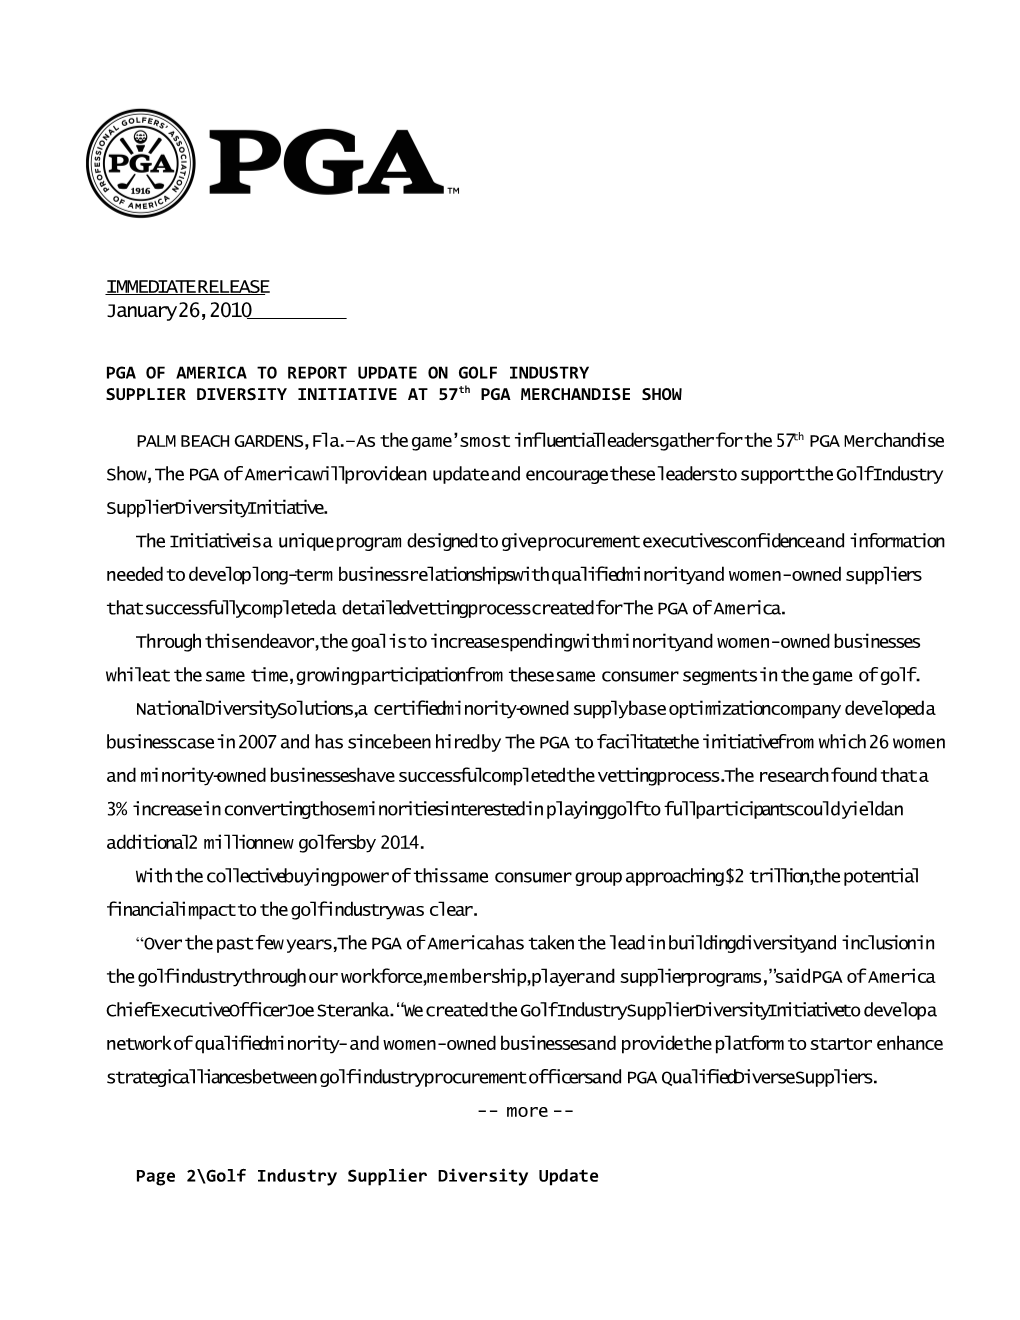 Pga of America to Report Update on Golf Industry